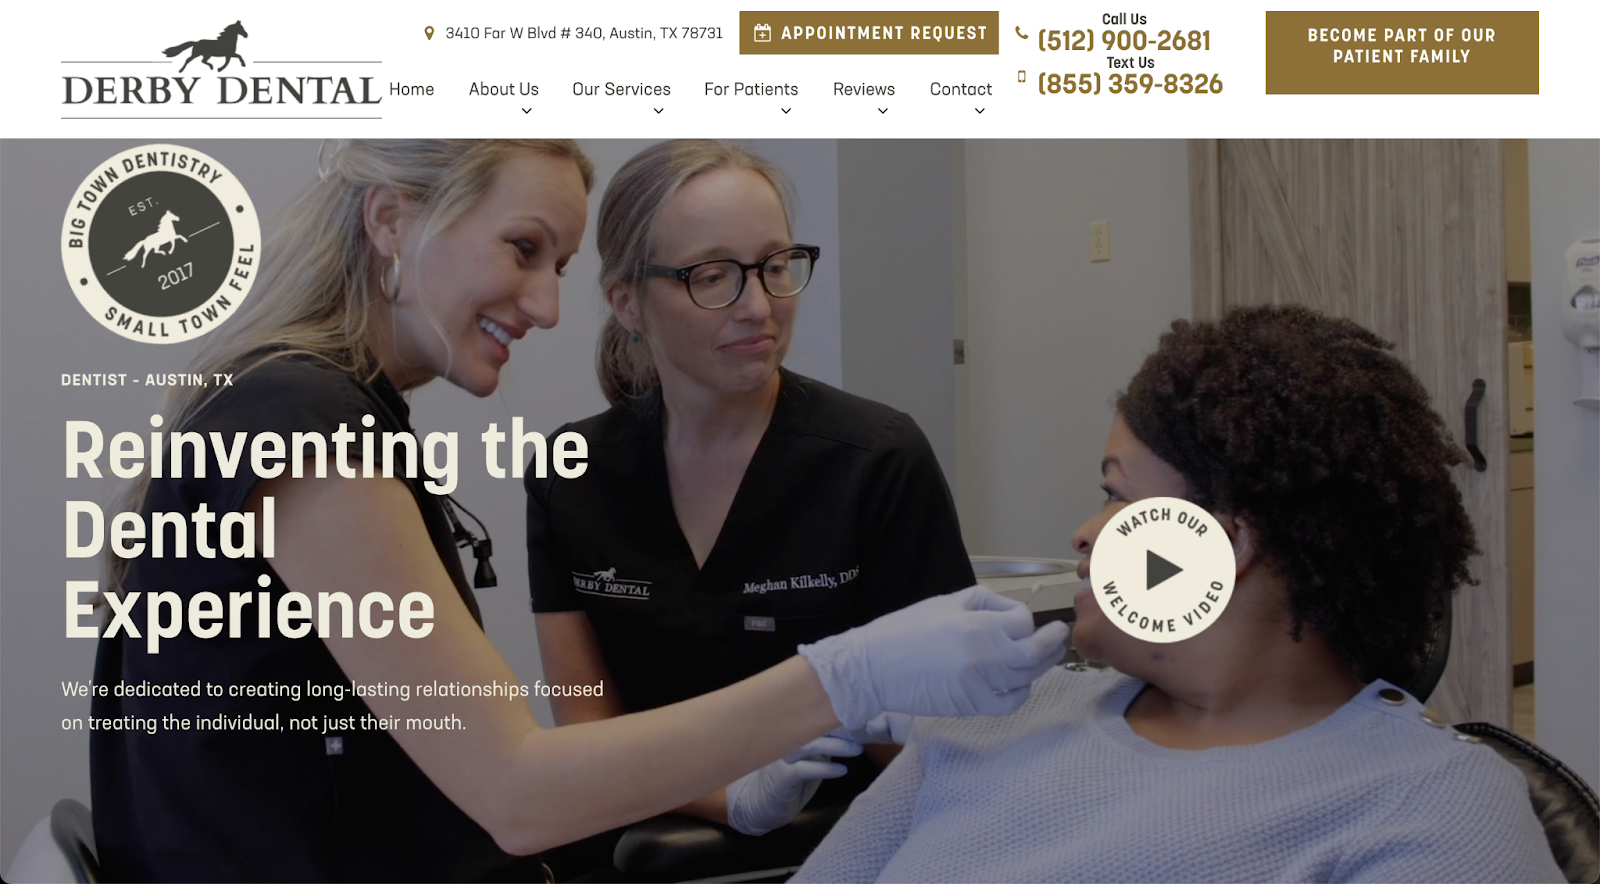 Our list of the best dental website designs for inspiration includes Derby Dental for its clean and professional design